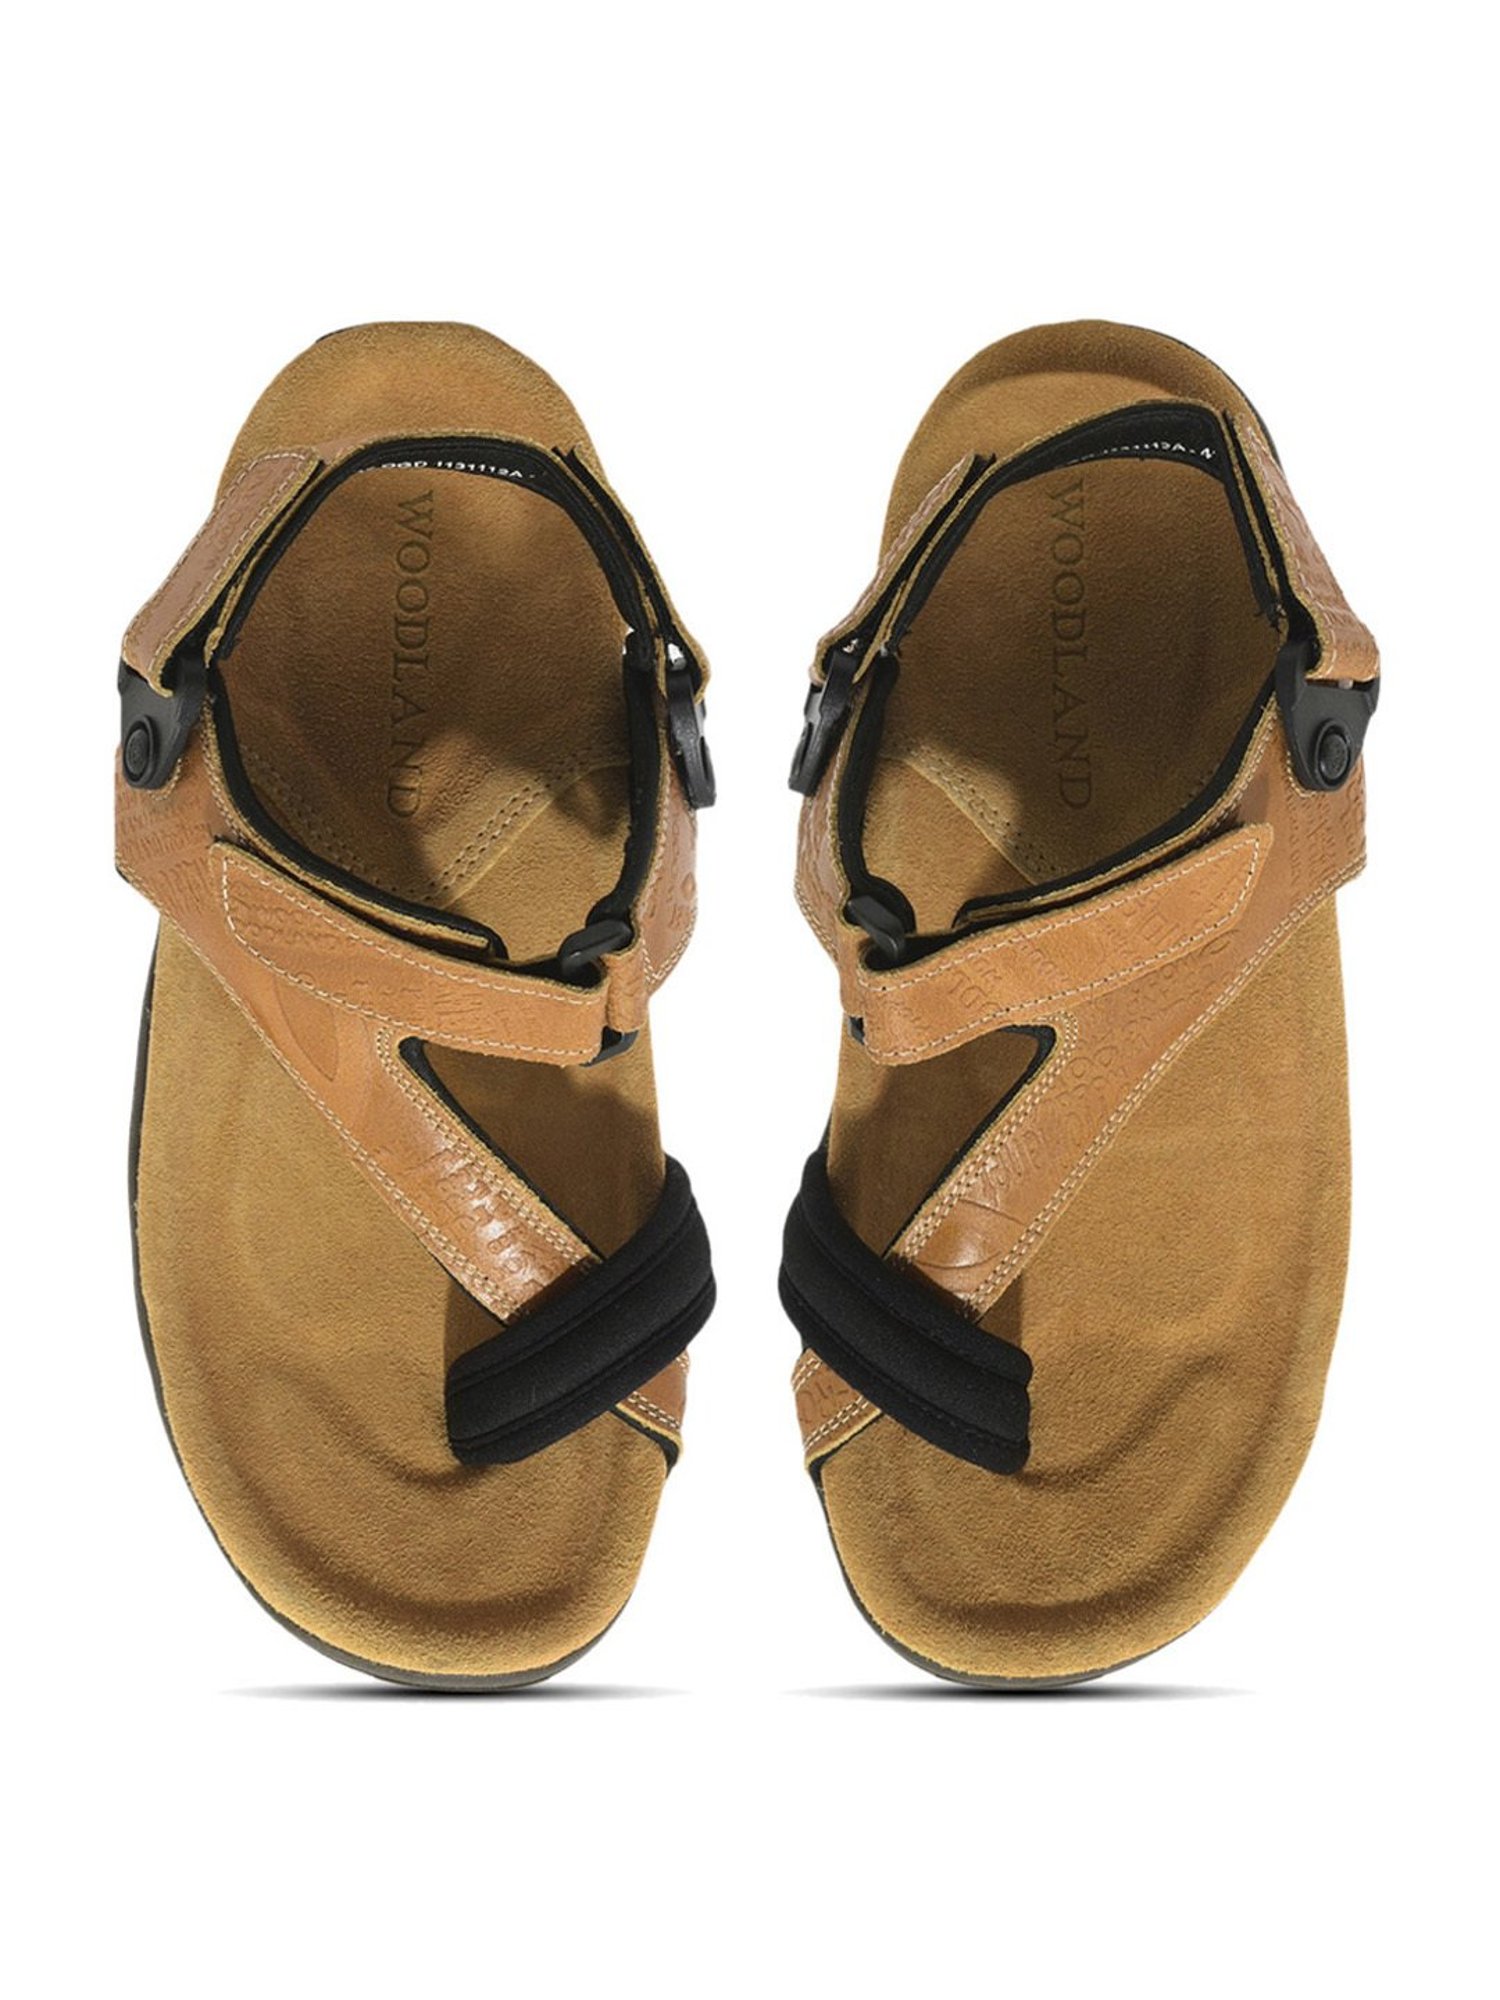 Buy Woodland Men's Multicolor Sandals Online @ ₹2295 from ShopClues